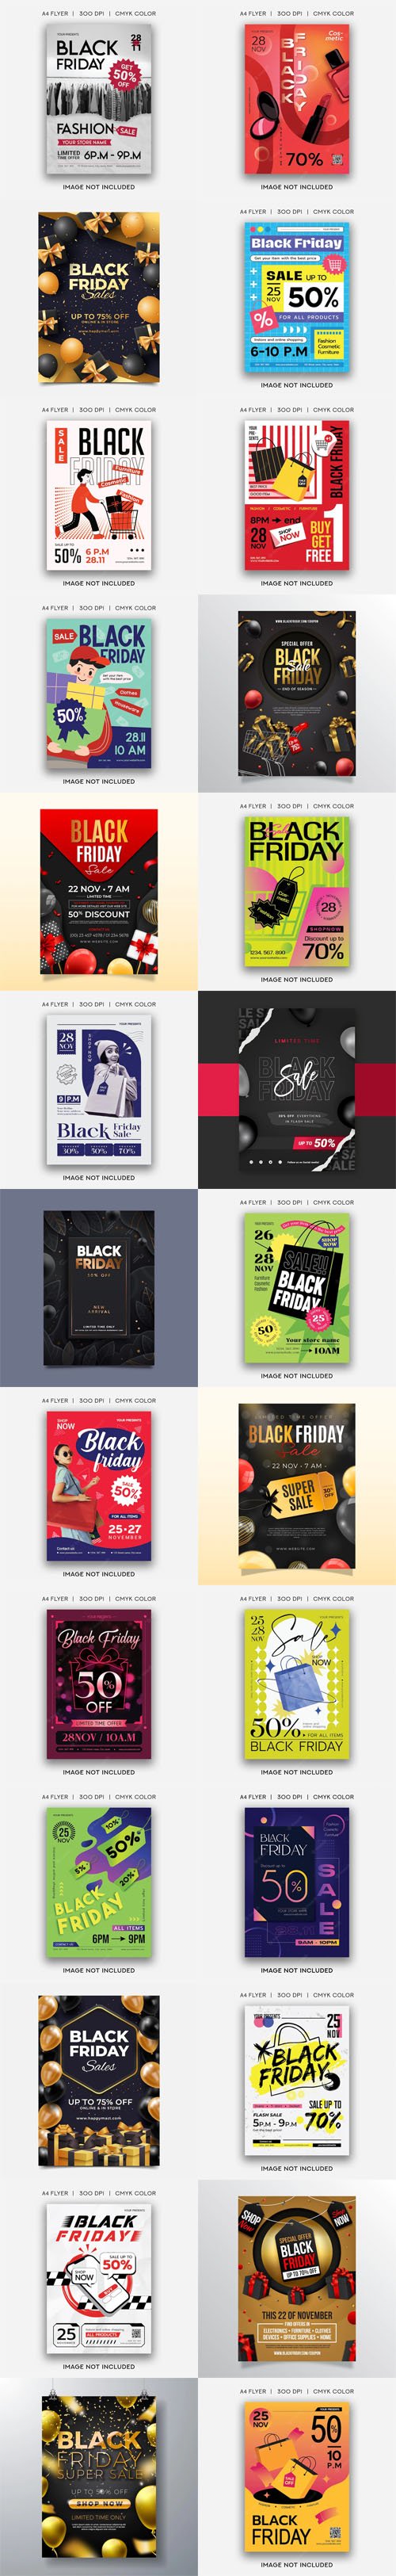 Black Friday - 20+ Flyers Vector Templates Collection